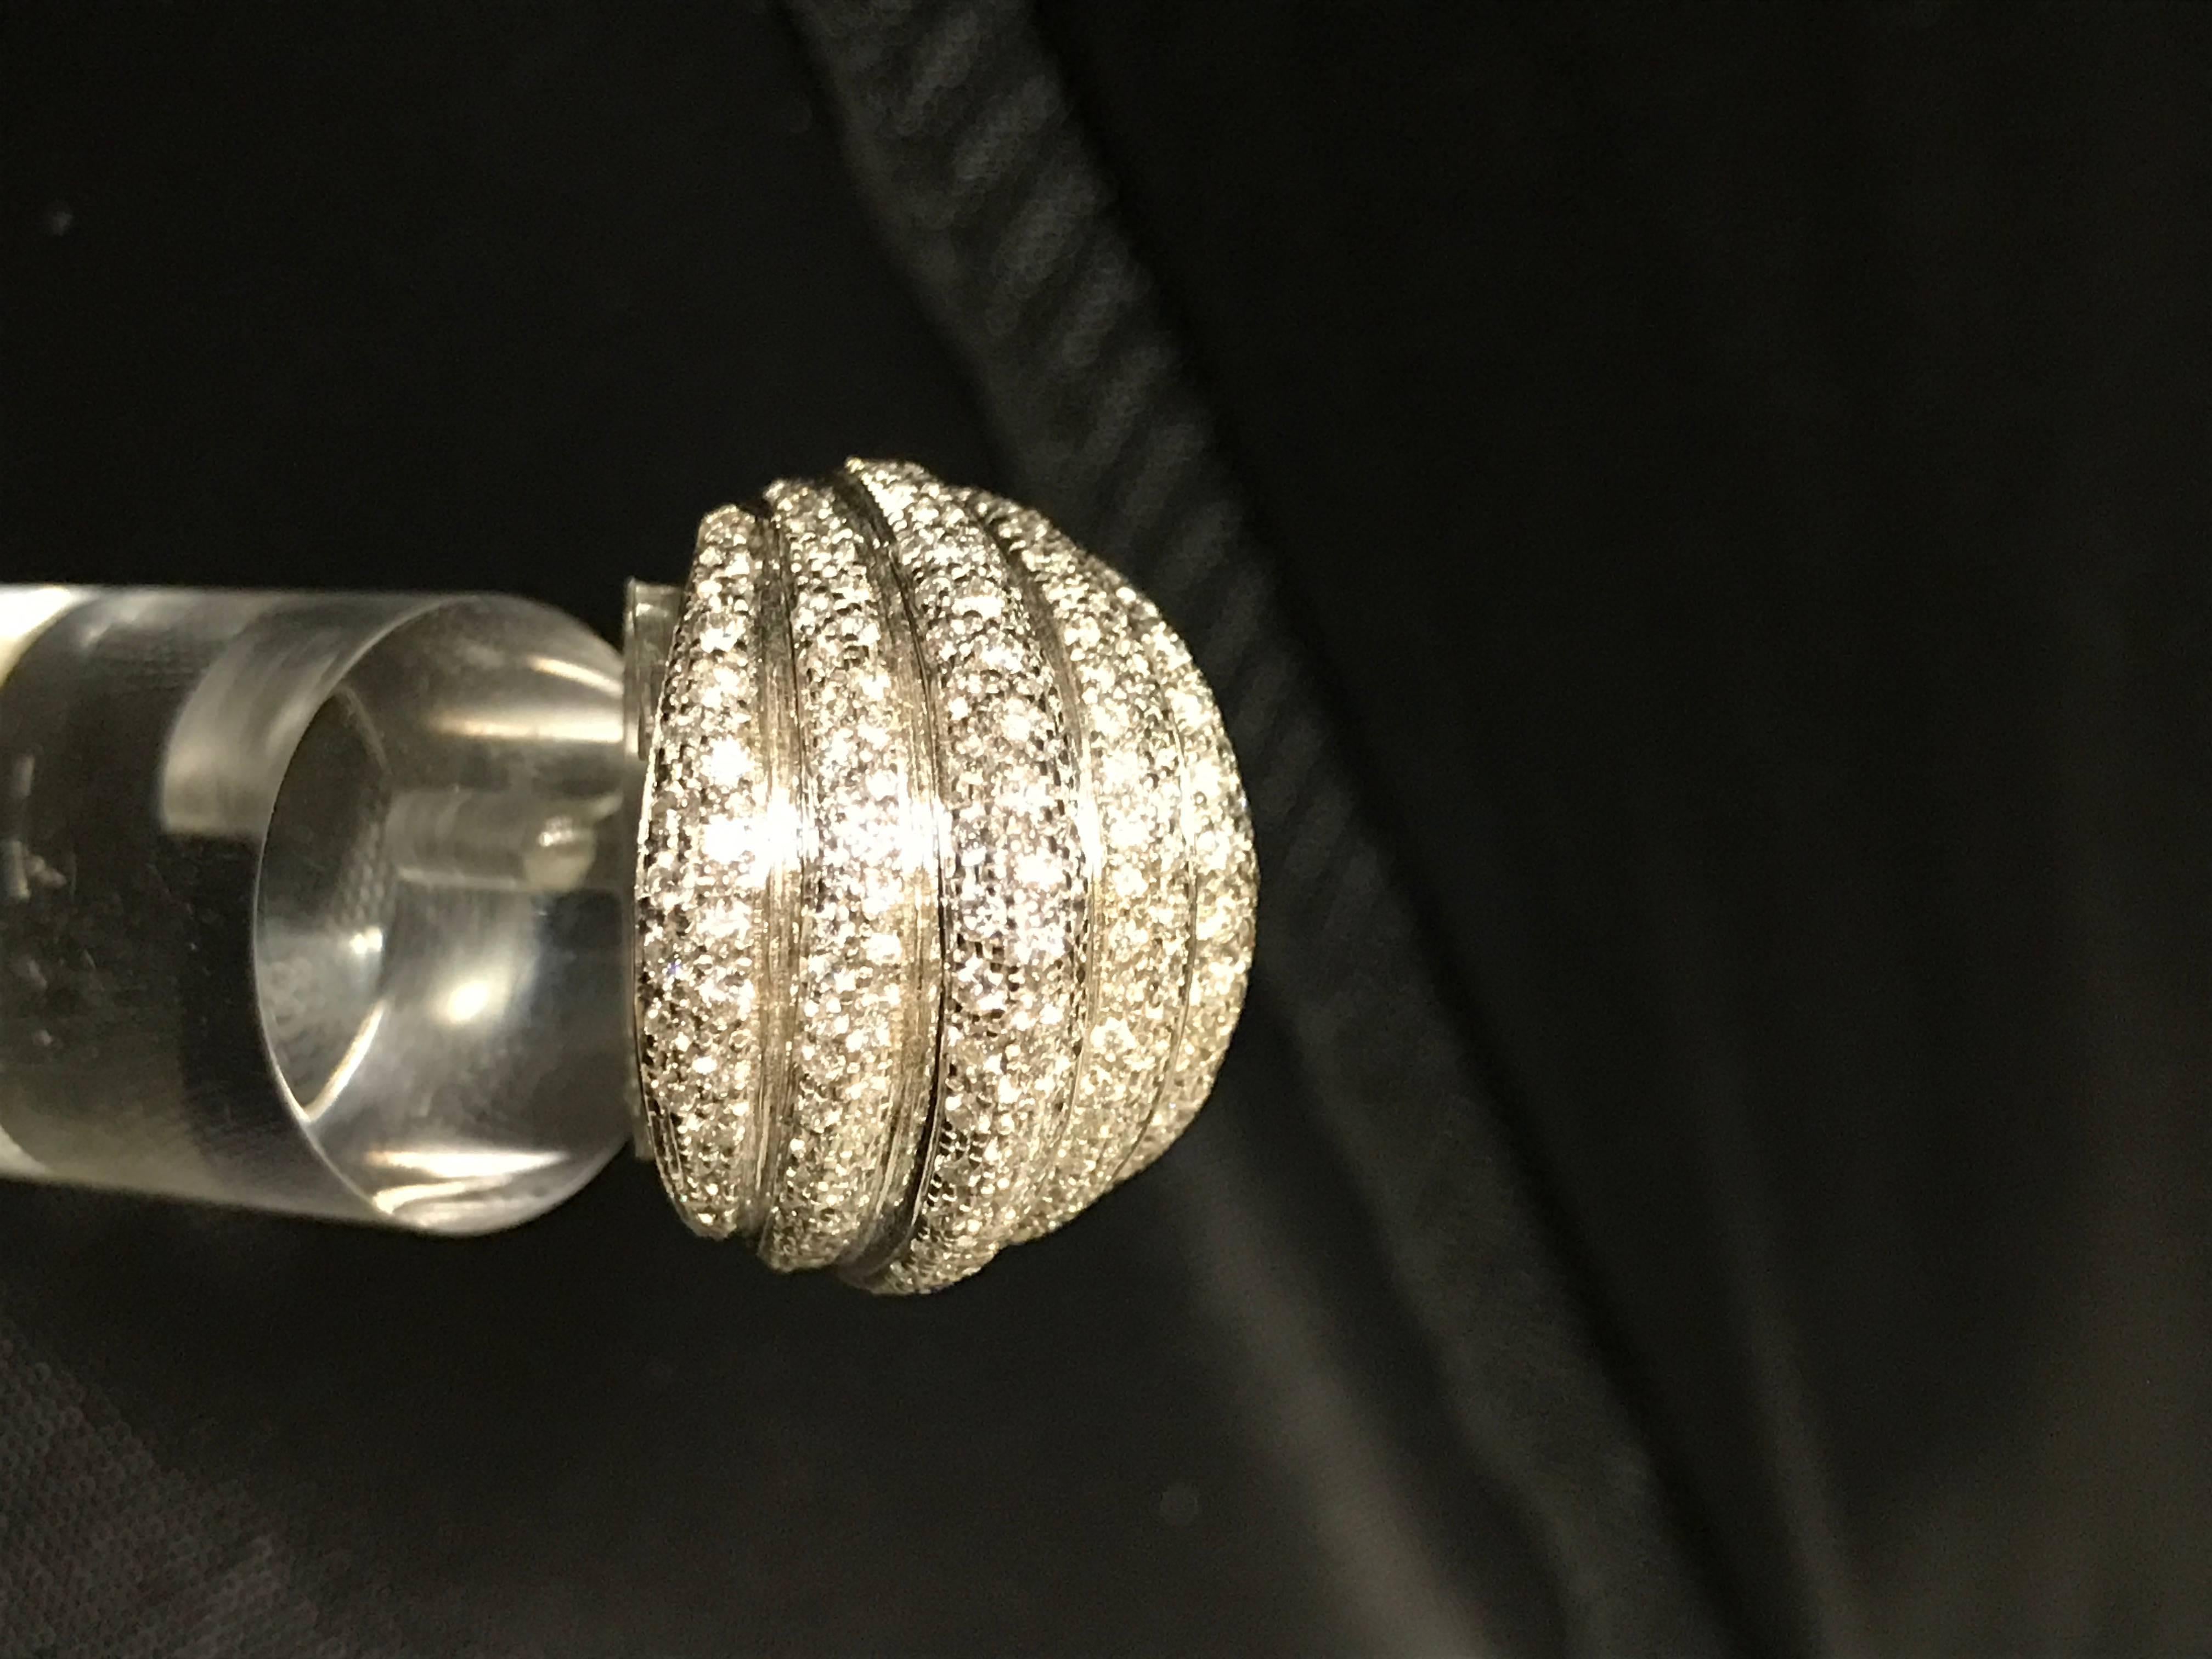 Discover this magnificent multiple ring in white gold and white diamonds, a true masterpiece of sophistication and elegance. This exceptional piece, crafted in 18-carat white gold, is embellished with white diamonds of incredible purity and